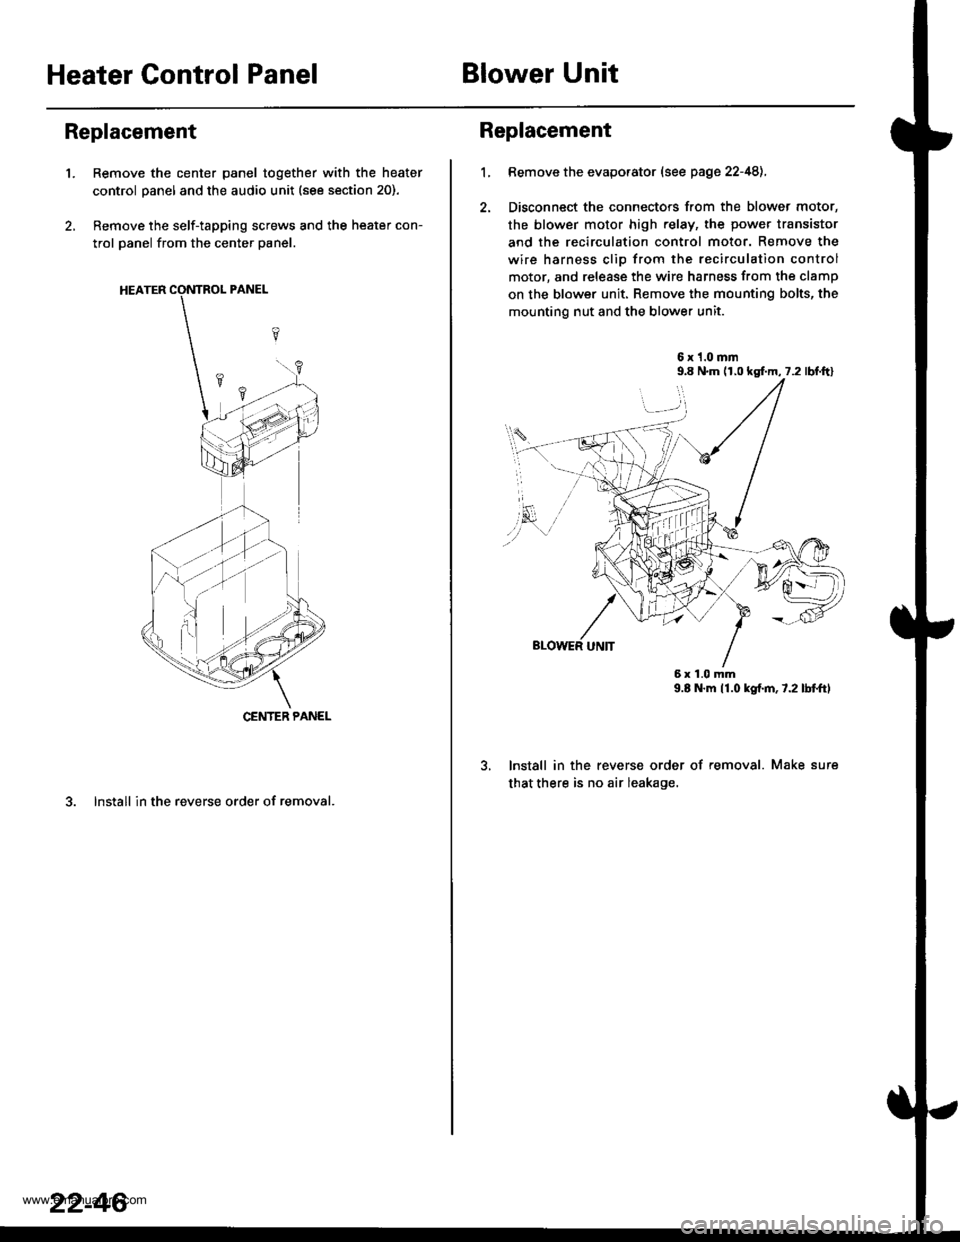 HONDA CR-V 1999 RD1-RD3 / 1.G Workshop Manual 
Heater Control PanelBlower Unit
Replacement
1.Remove the center panel together with the heater
control panel and the audio unit (see section 20).
Remove the self-tapping screws and the heater con-
t